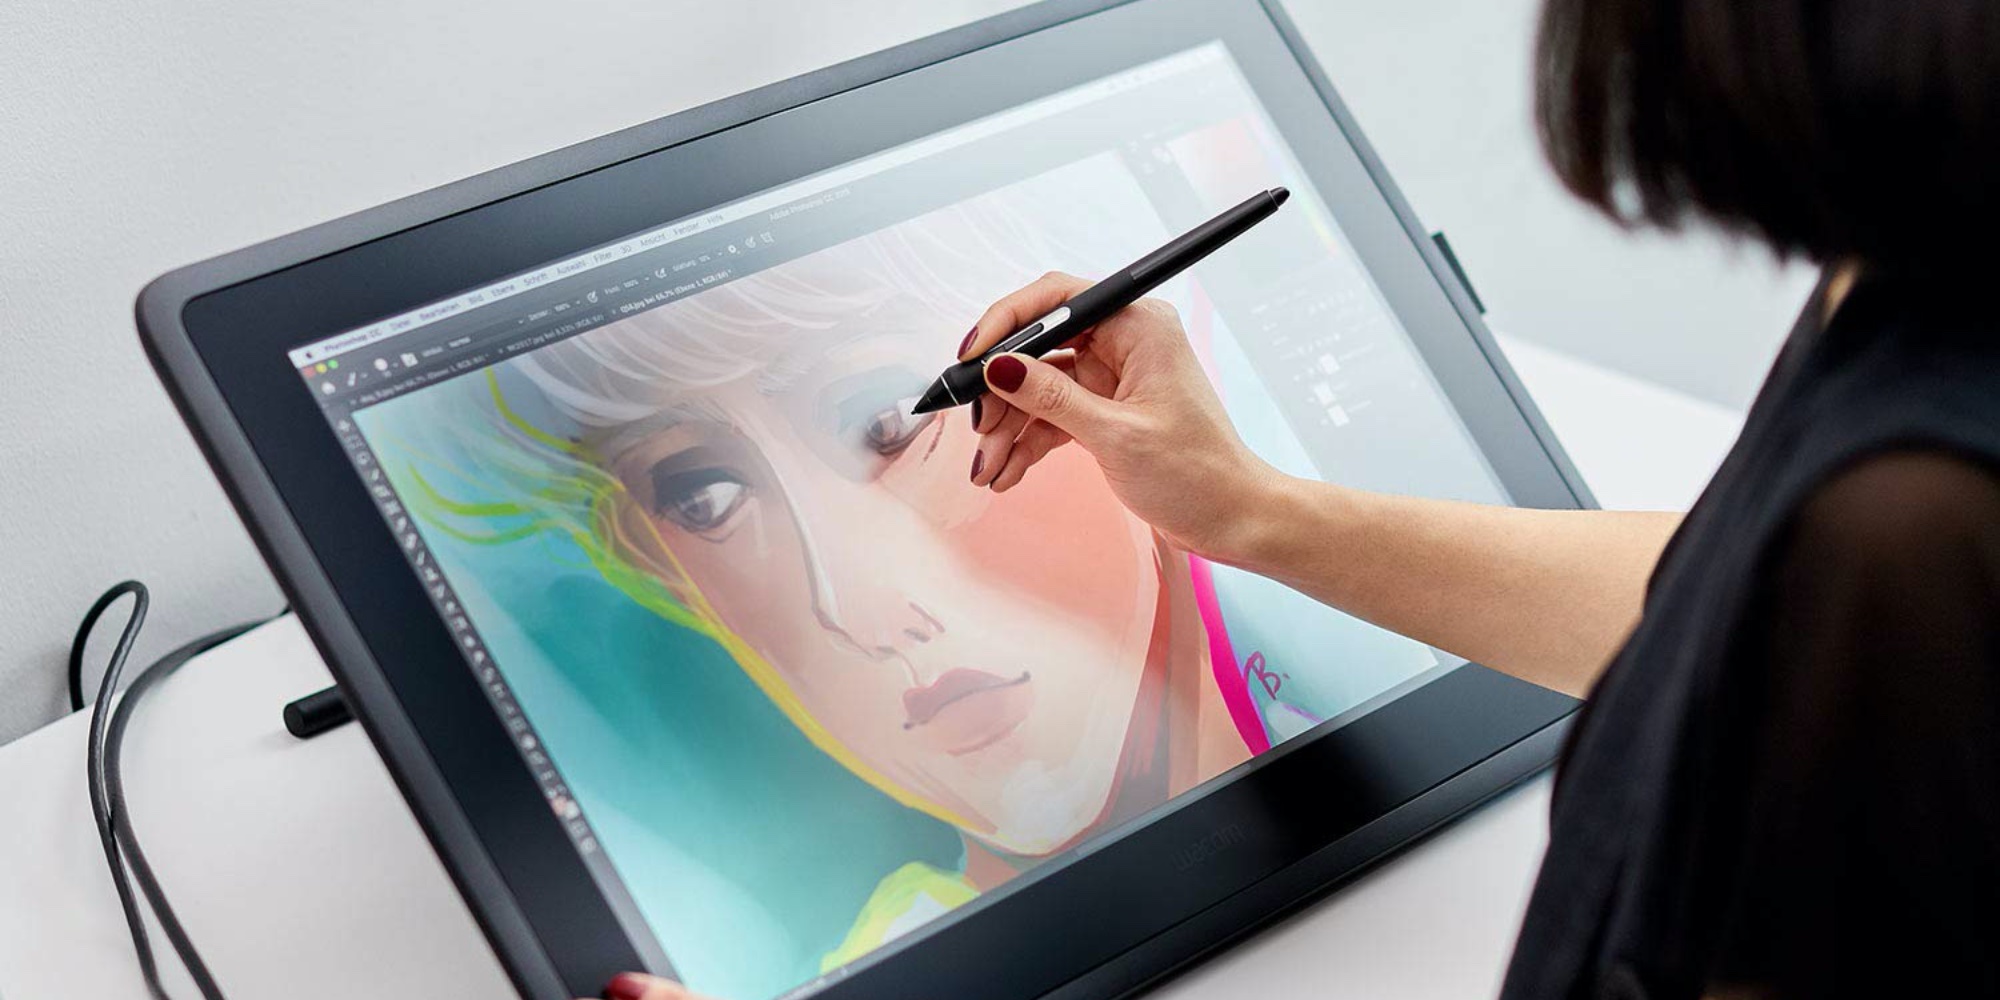 best free drawing software for wacom tablet